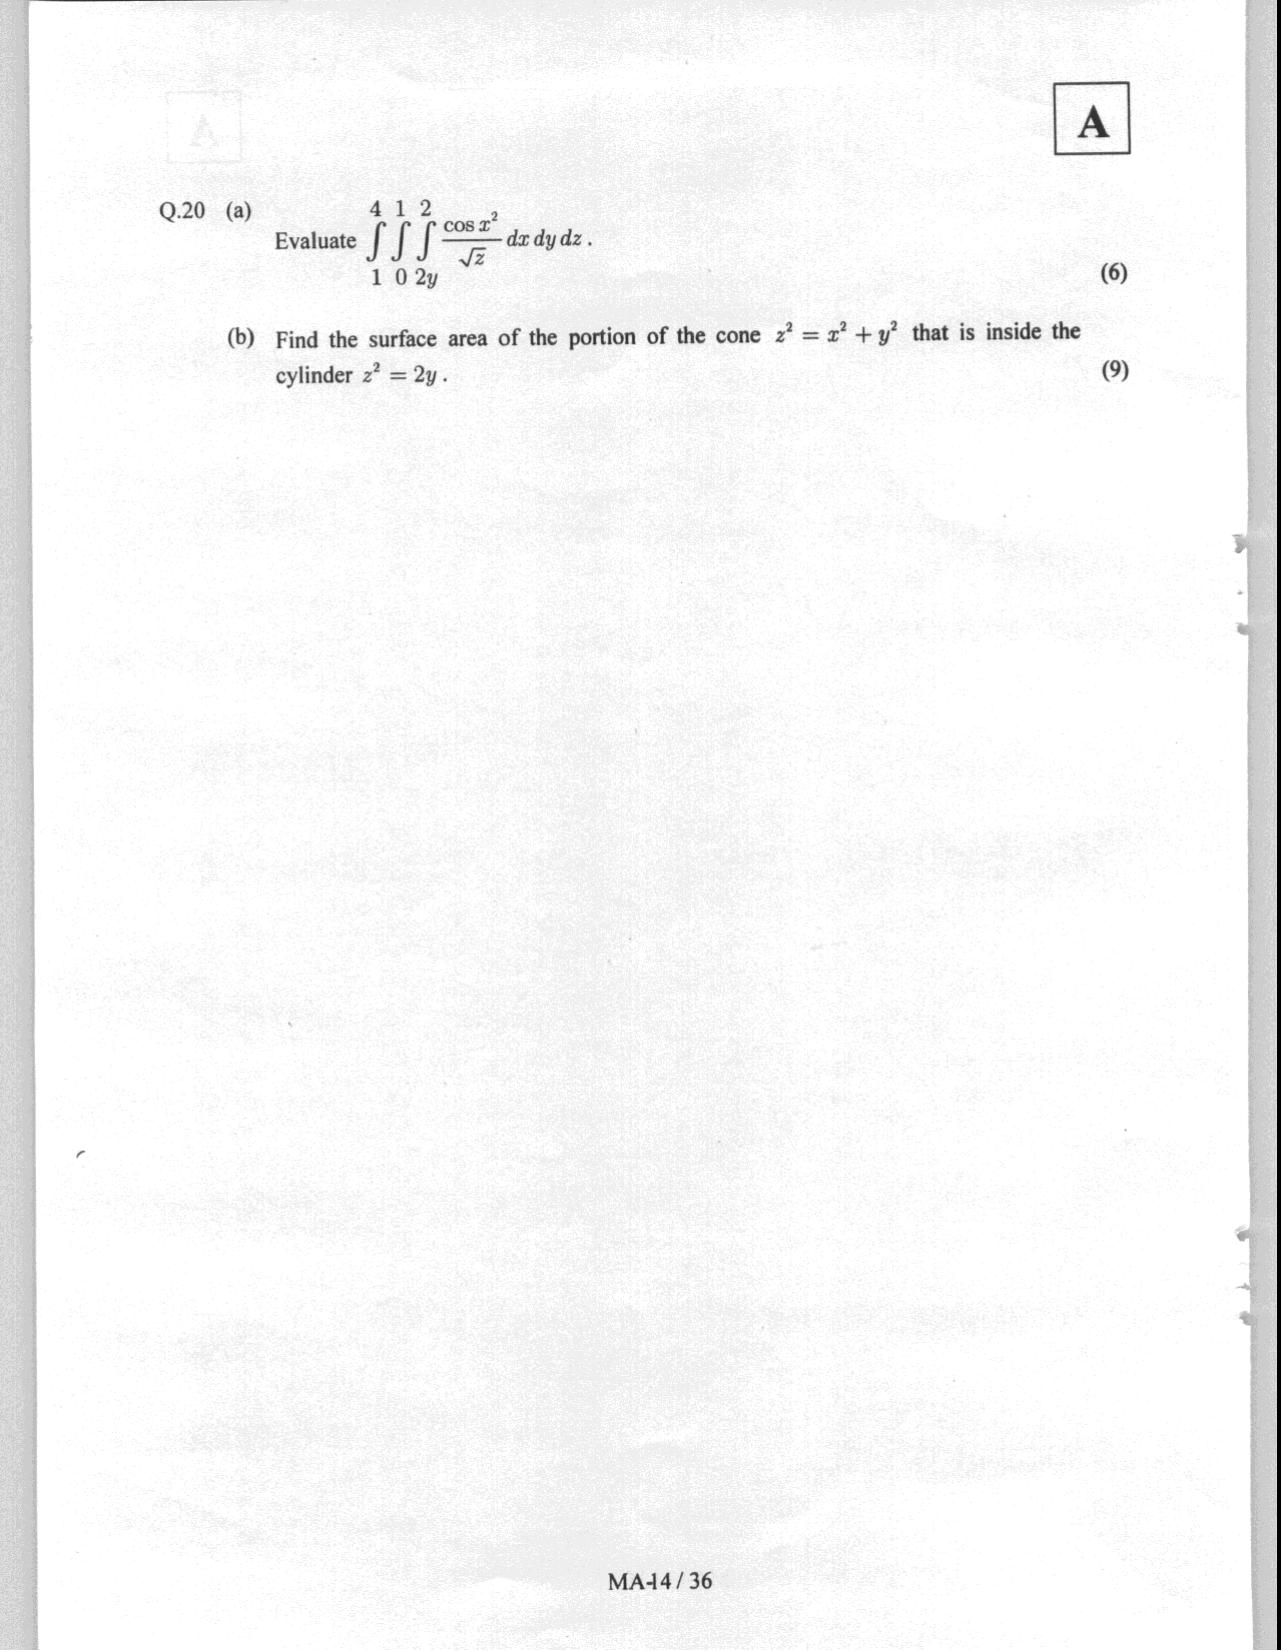 JAM 2008: MA Question Paper - Page 16